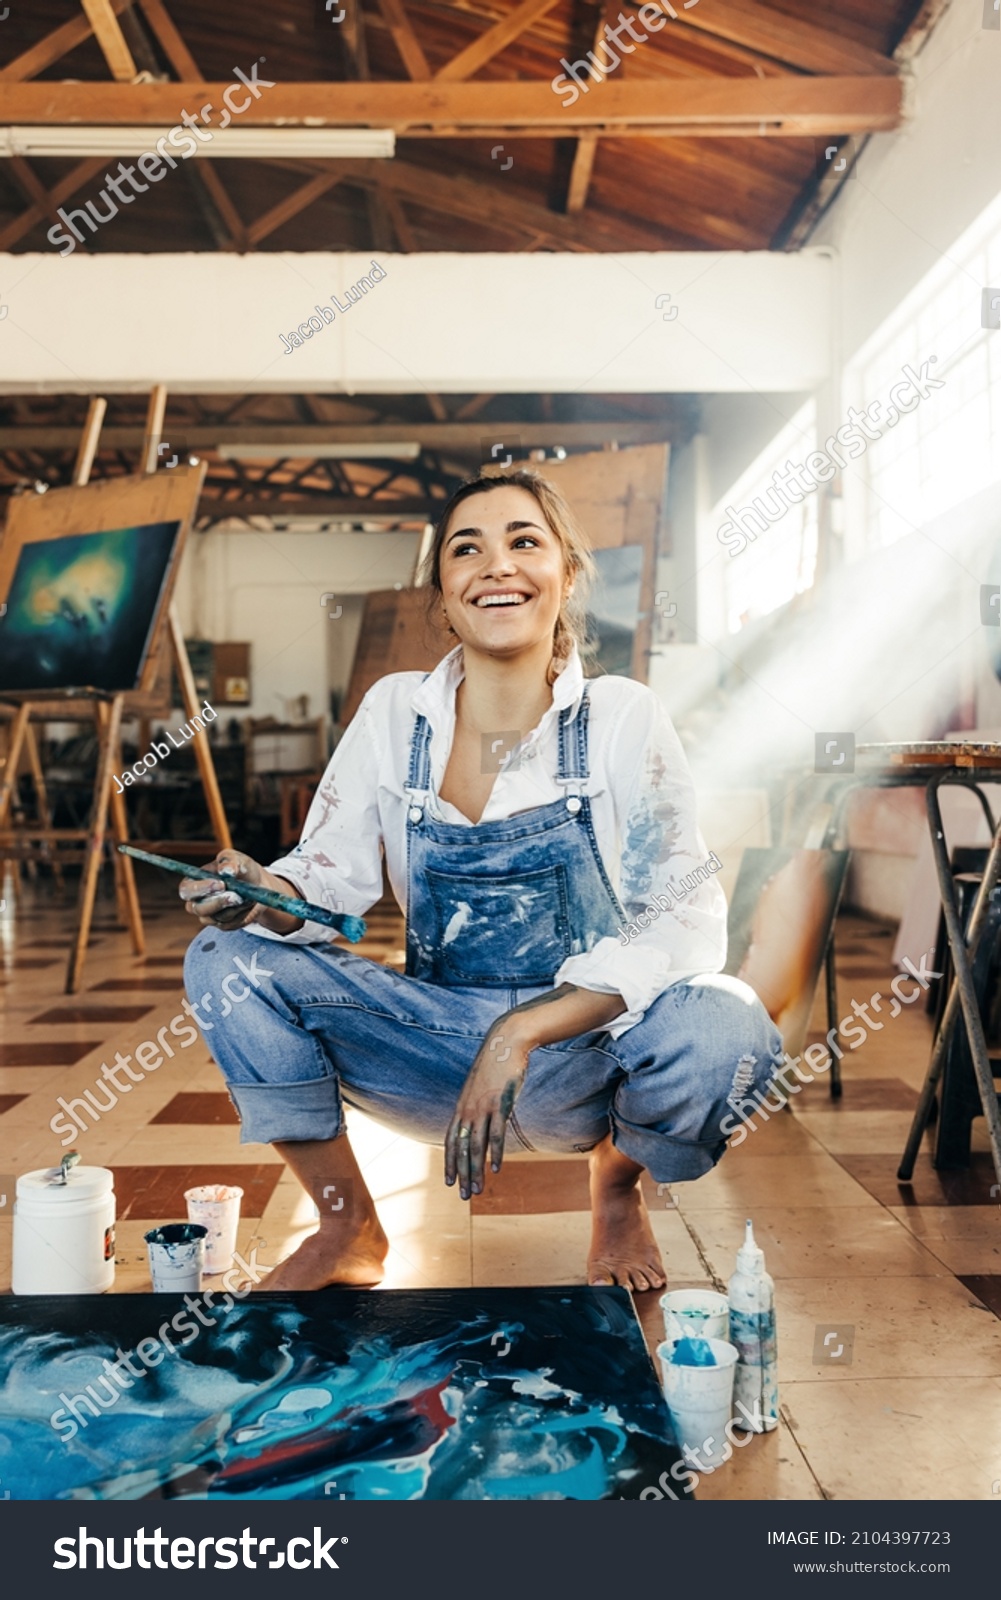 Inspired young artist looking away with a smile in her art studio. Happy female painter contemplating new creative ideas for her art project. Imaginative young woman painting on a canvas on the floor. #2104397723